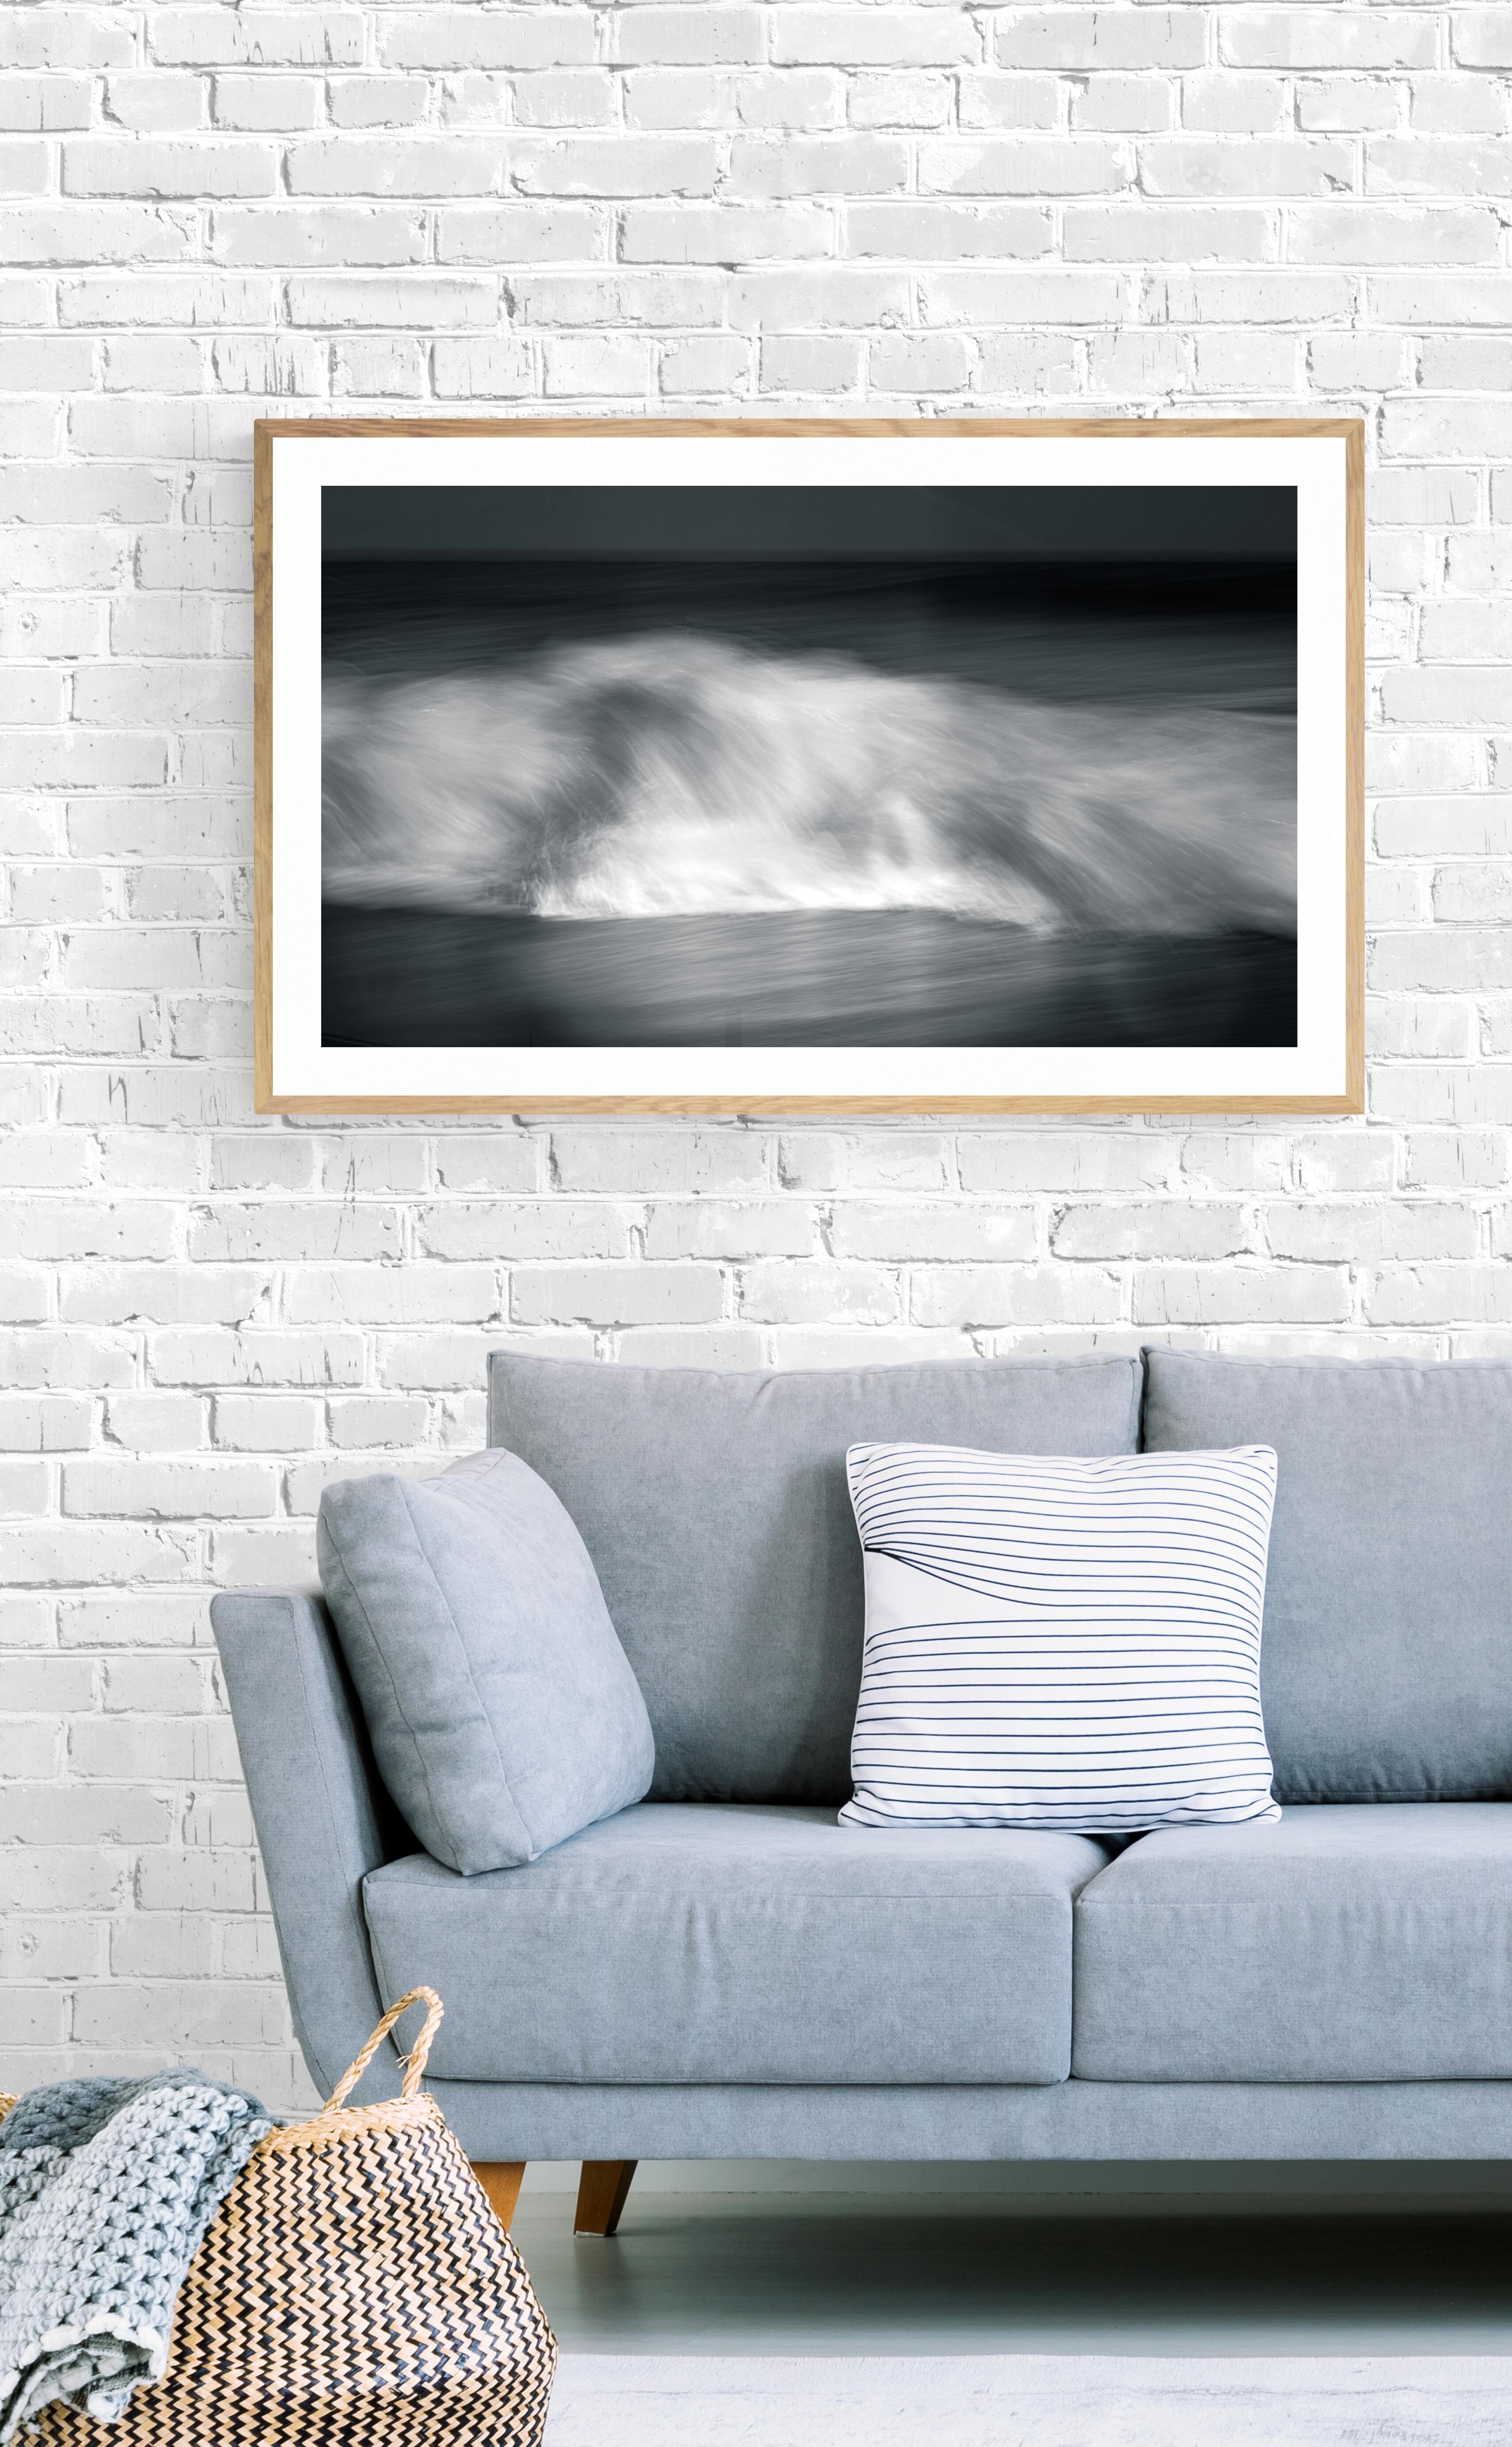 Limited Edition 1 / 7 Black and White Photograph Seascape - Kinetic #37
This is #37 from the Kinetic Solitude series. It has been shown in the Dow Museum of Fine Arts as part of a exhibition that explored variations on the theme of water.

My